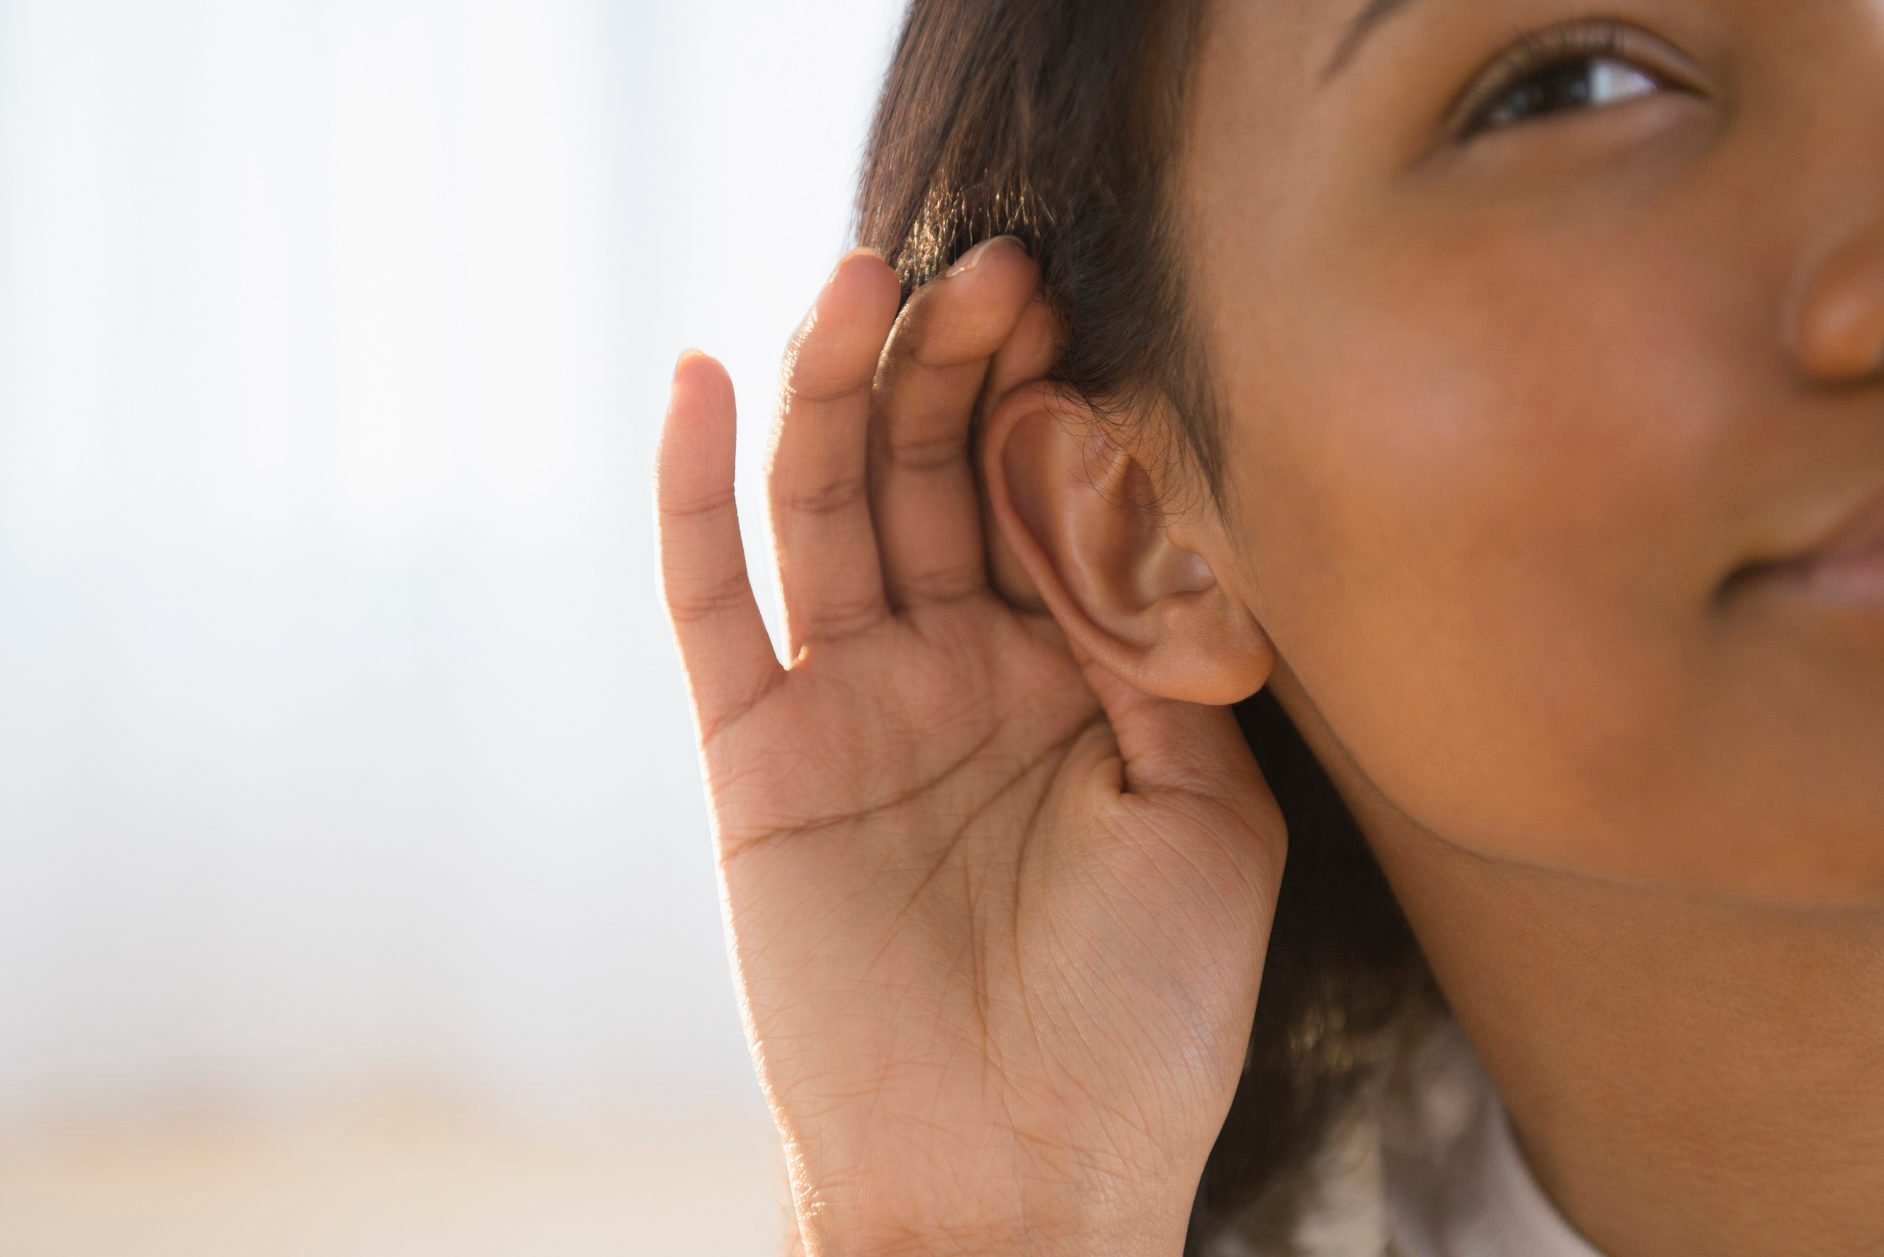 Listen Up! 11 Surprising Things That Could Ruin Your Hearing